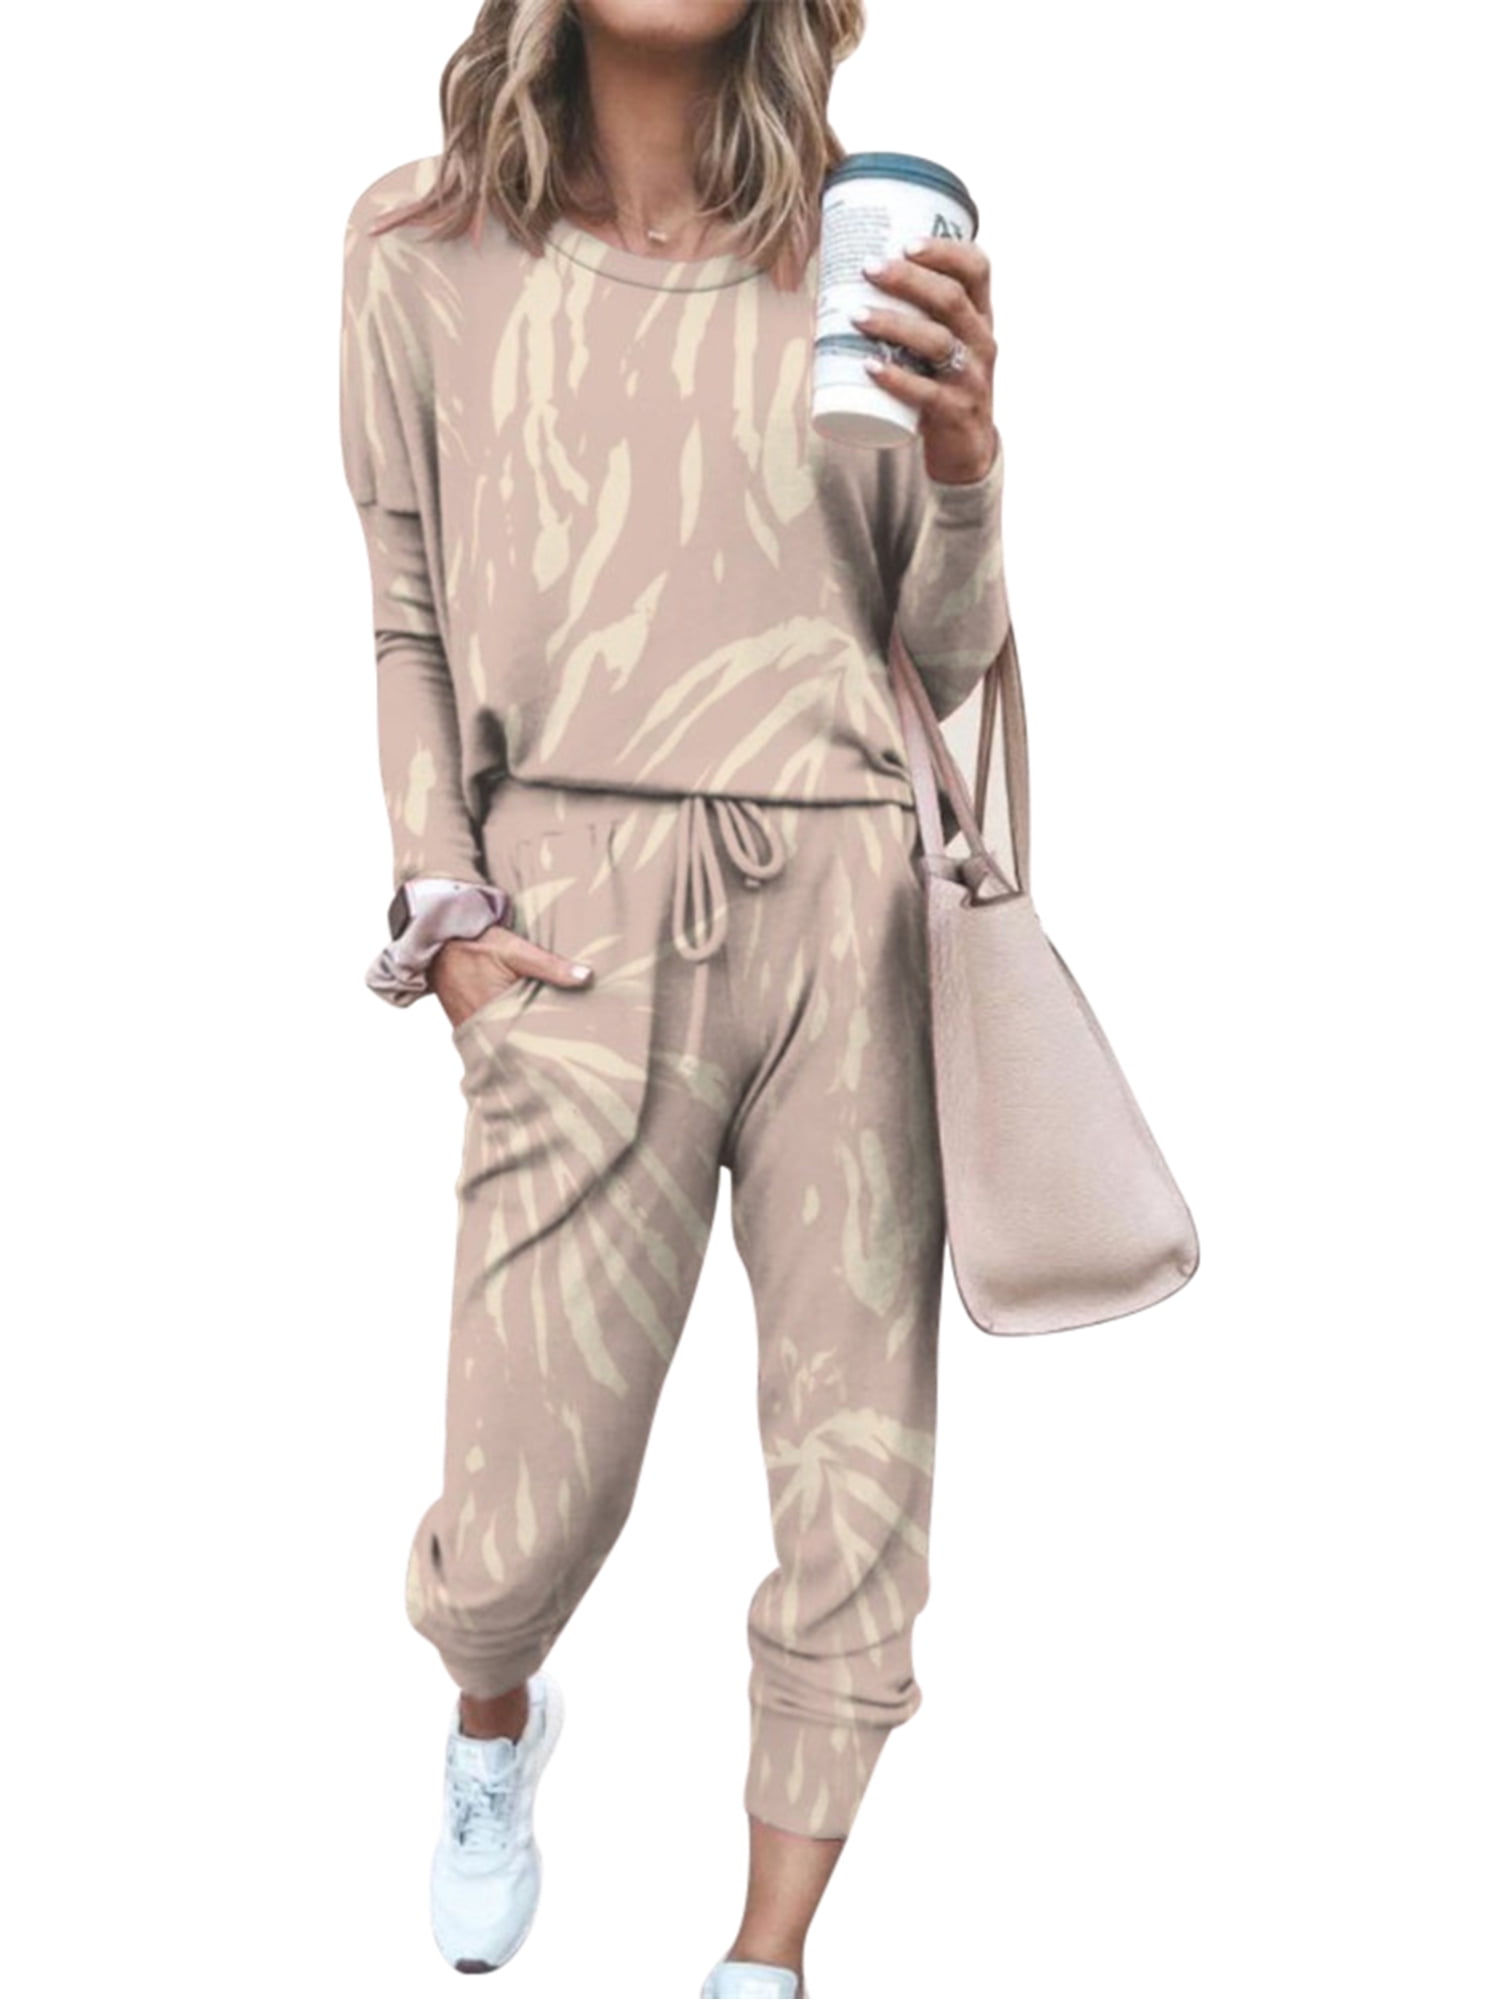 PRETTYGARDEN Women's 2 Piece Outfits Side Stripe Pullover Shirts and Long Pants Jogger Lounge Sweatsuit Sets 